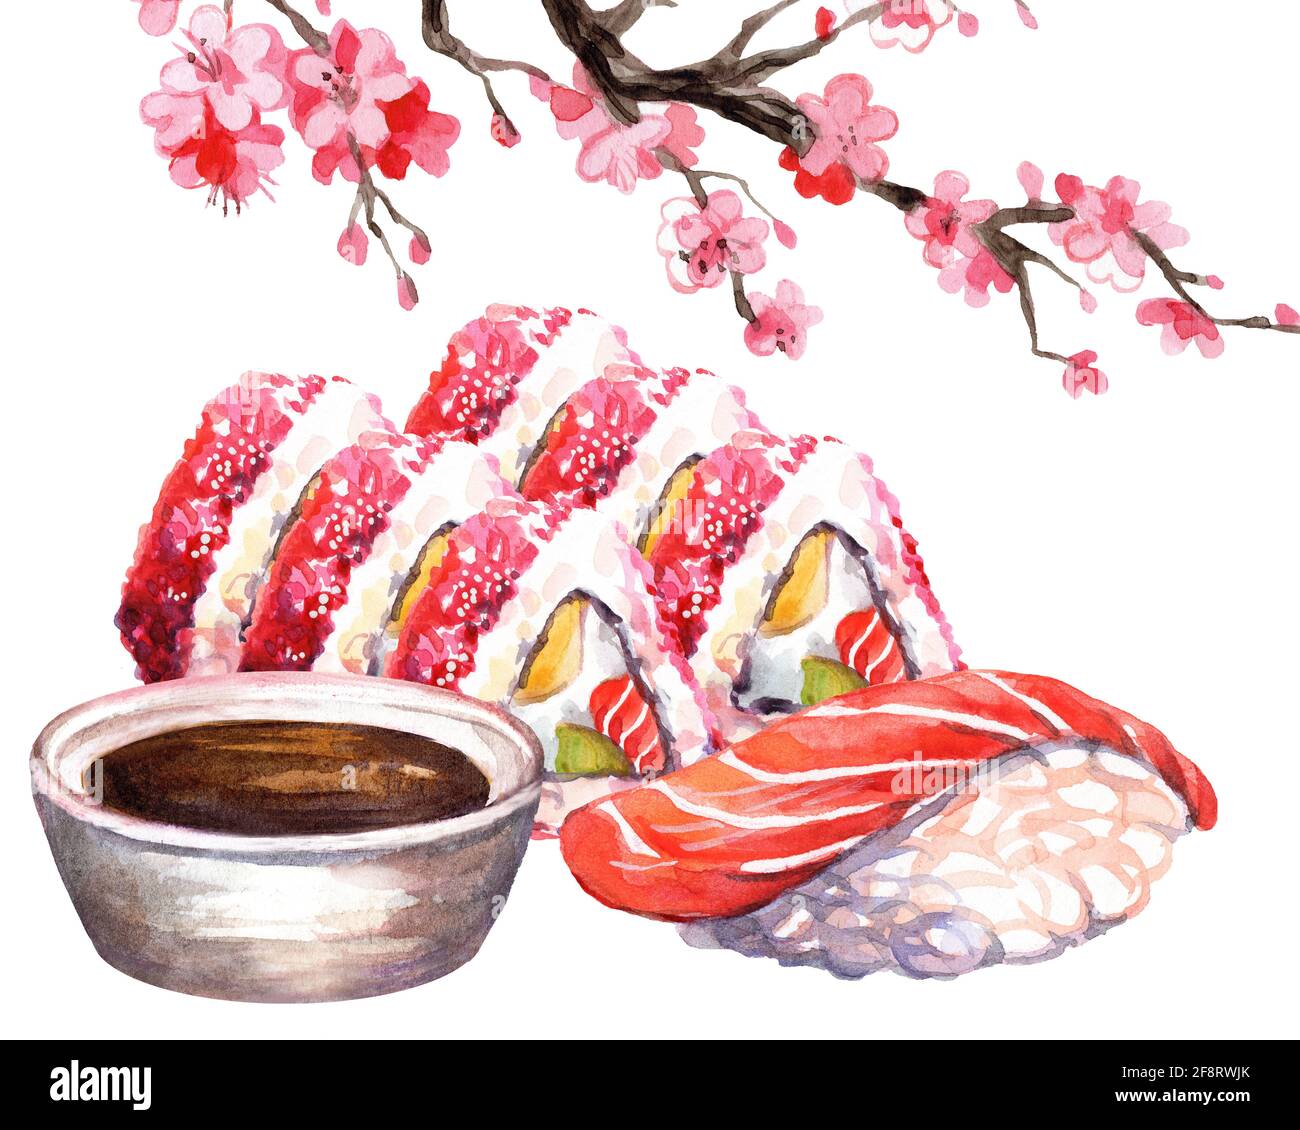 Japanese cuisine sushi with sakura blossom branch, watercolor illustration isolated on white background. For design sushi restaurant menu, cards, prin Stock Photo